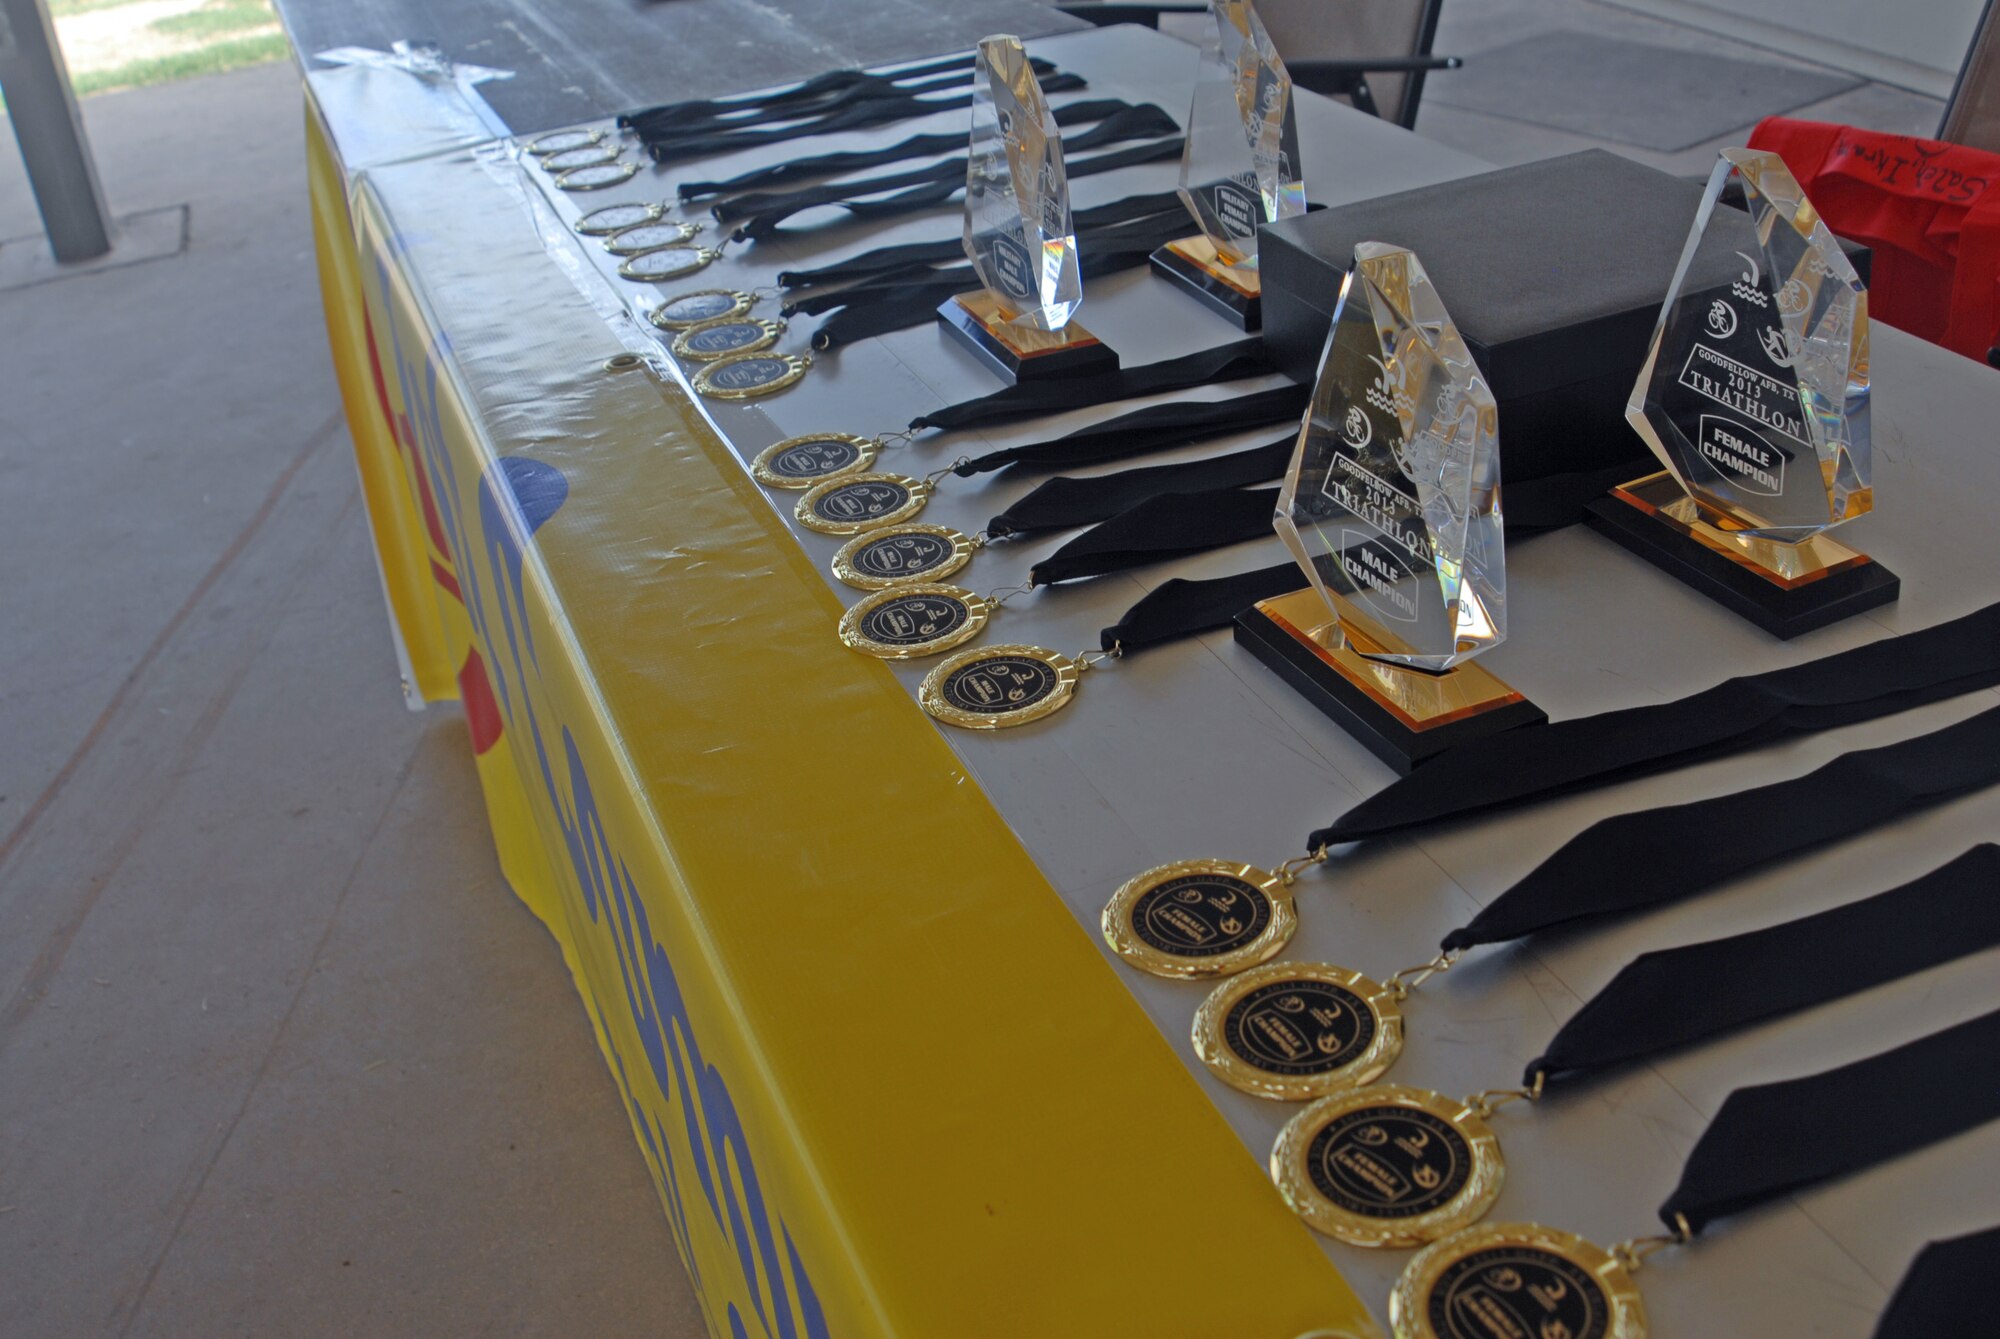 SAN ANGELO, Texas – The awards and medals for the 2013 Annual Triathlon are displayed on a table at the Goodfellow Recreation Camp July 27. The awards and medals were presented to top overall male and female; top male team, female team, and coed team; top military male and female; and squadron participation. (U.S. Air force photo/ Airman 1st Class Breonna Veal)